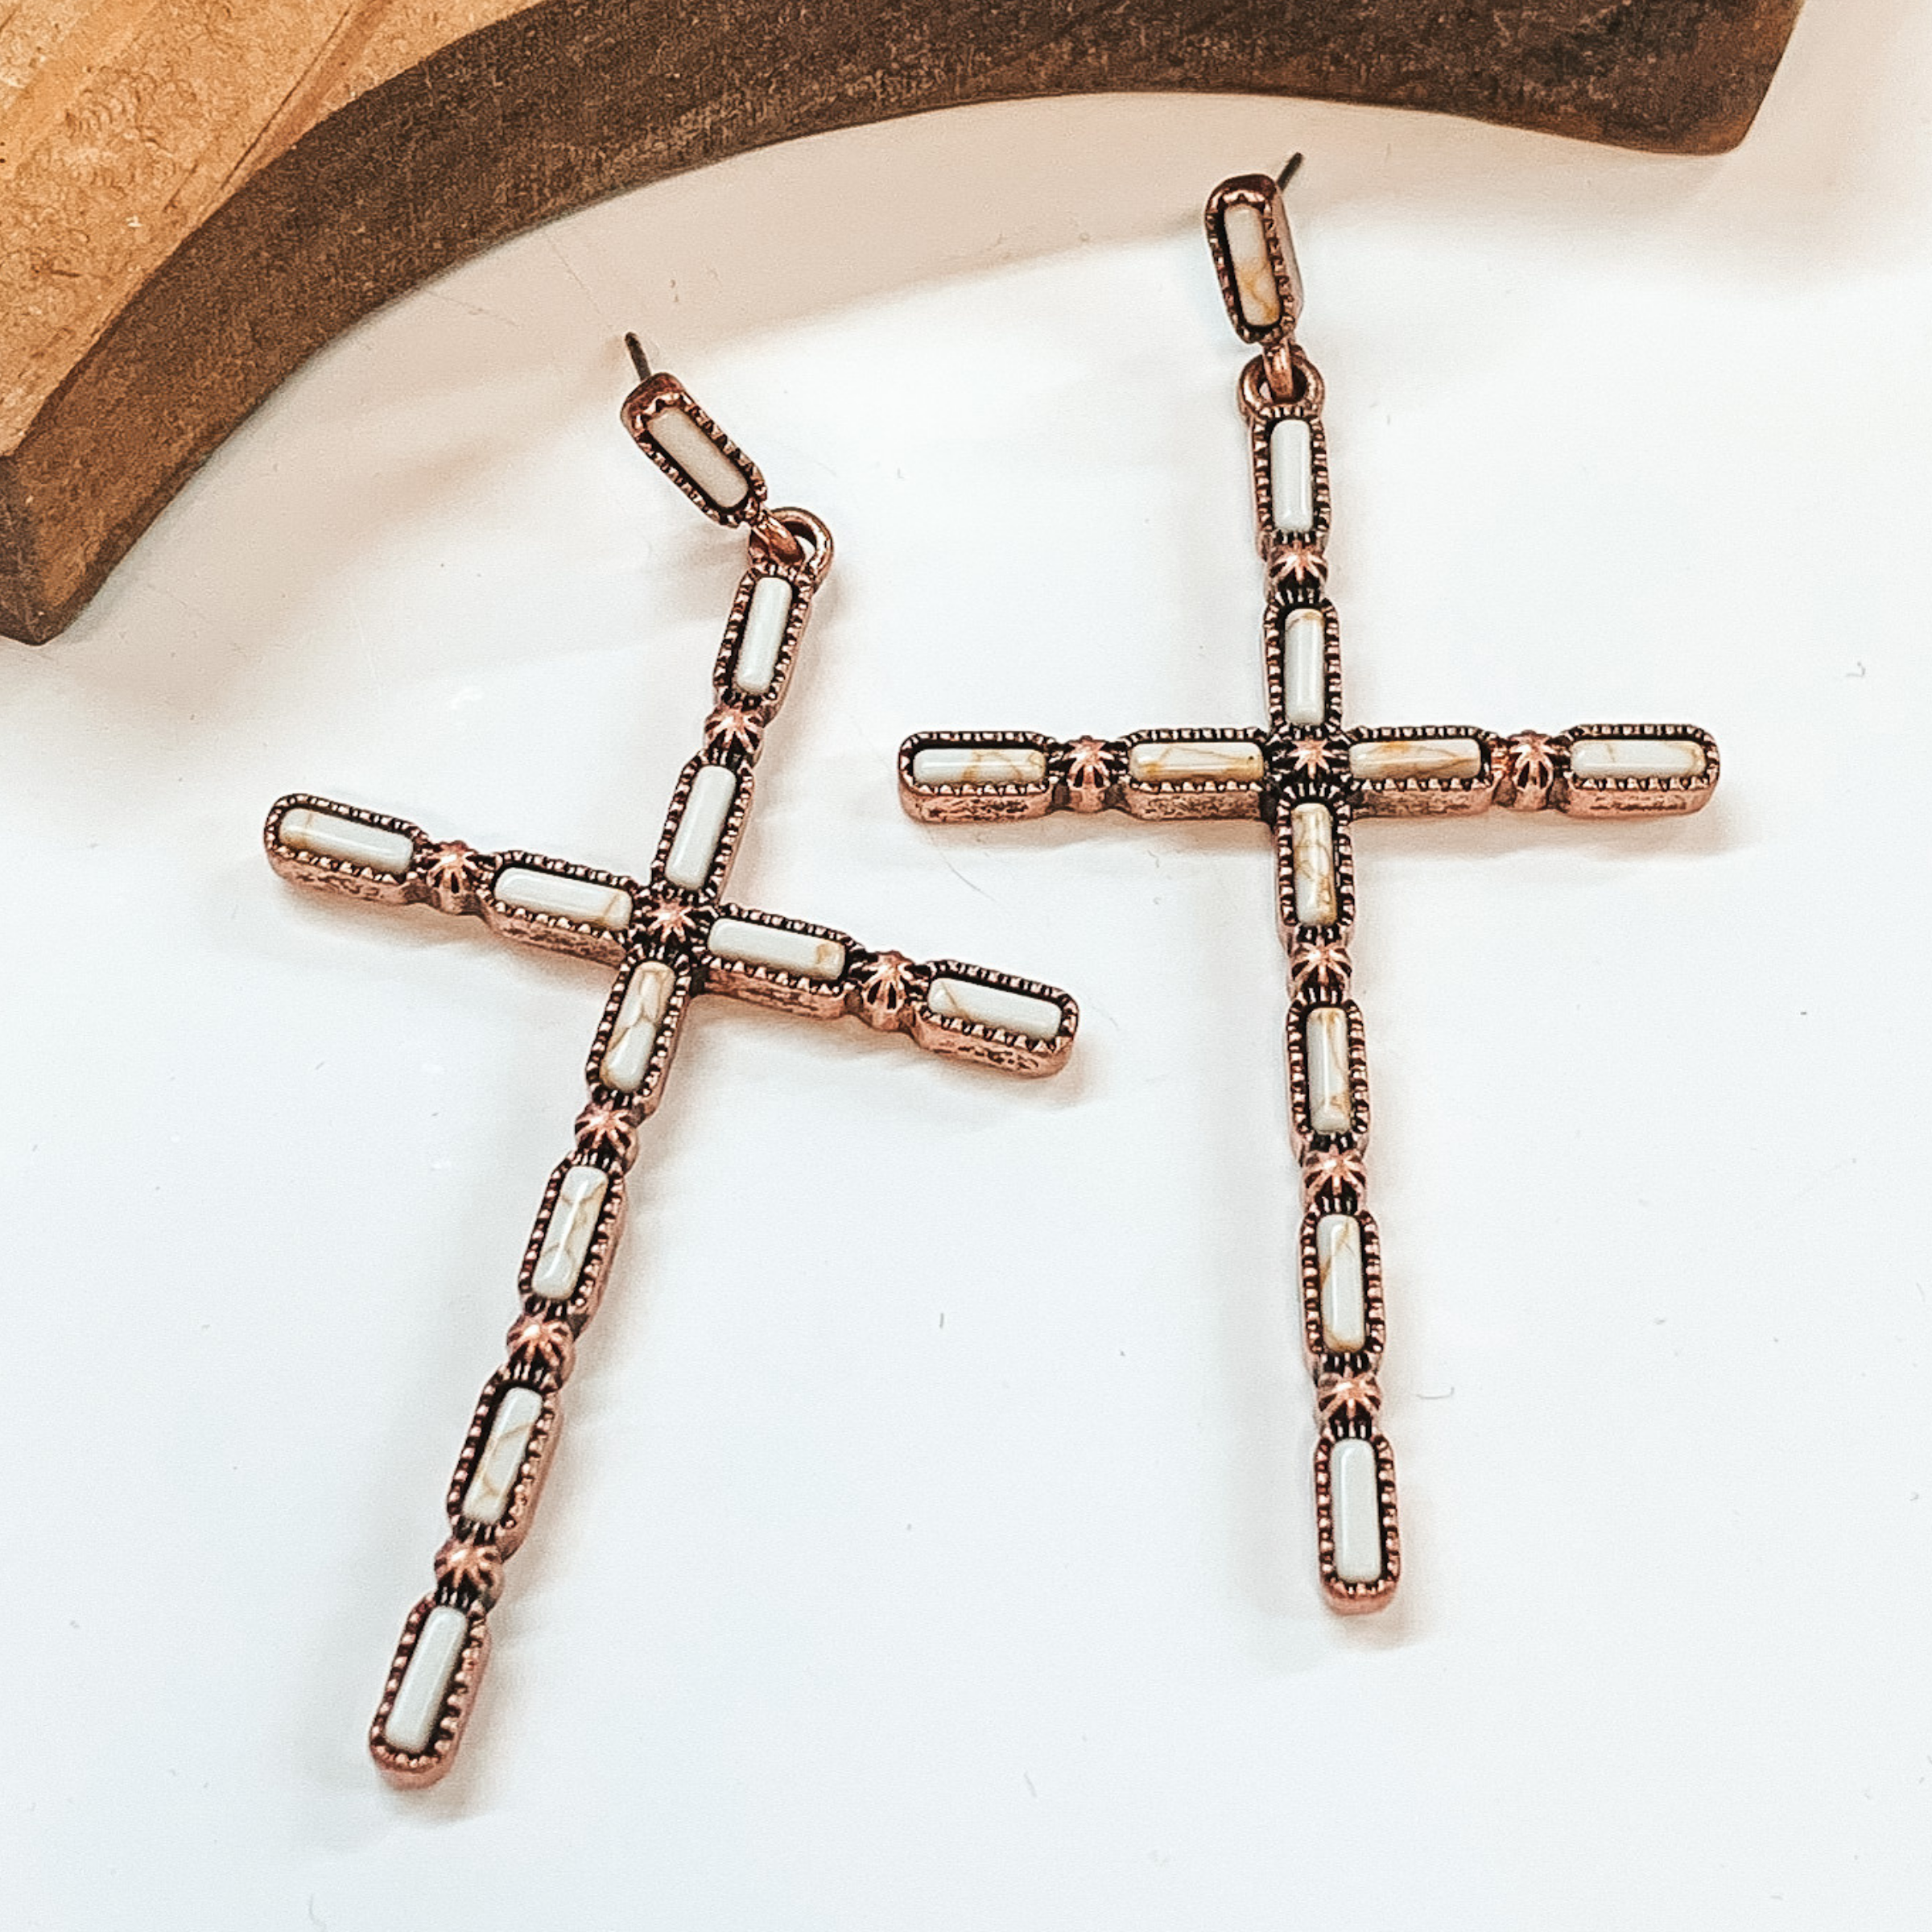 Copper cross earrings with rectangle, ivory  stones and small silver star-like details.    Taken in a white background with a brown block in the back.